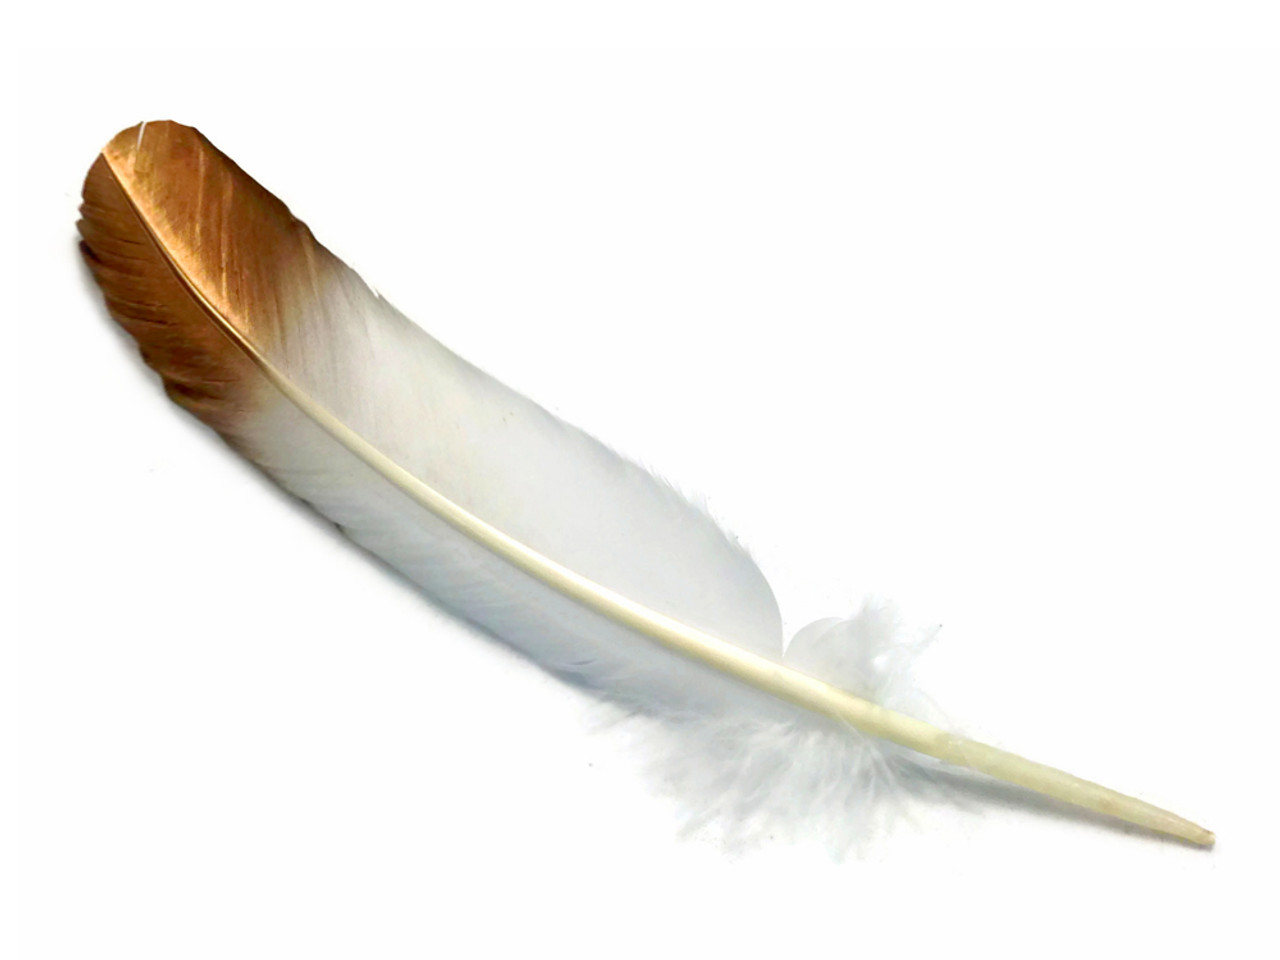 White with Black Tip Quill Feathers by the Pound